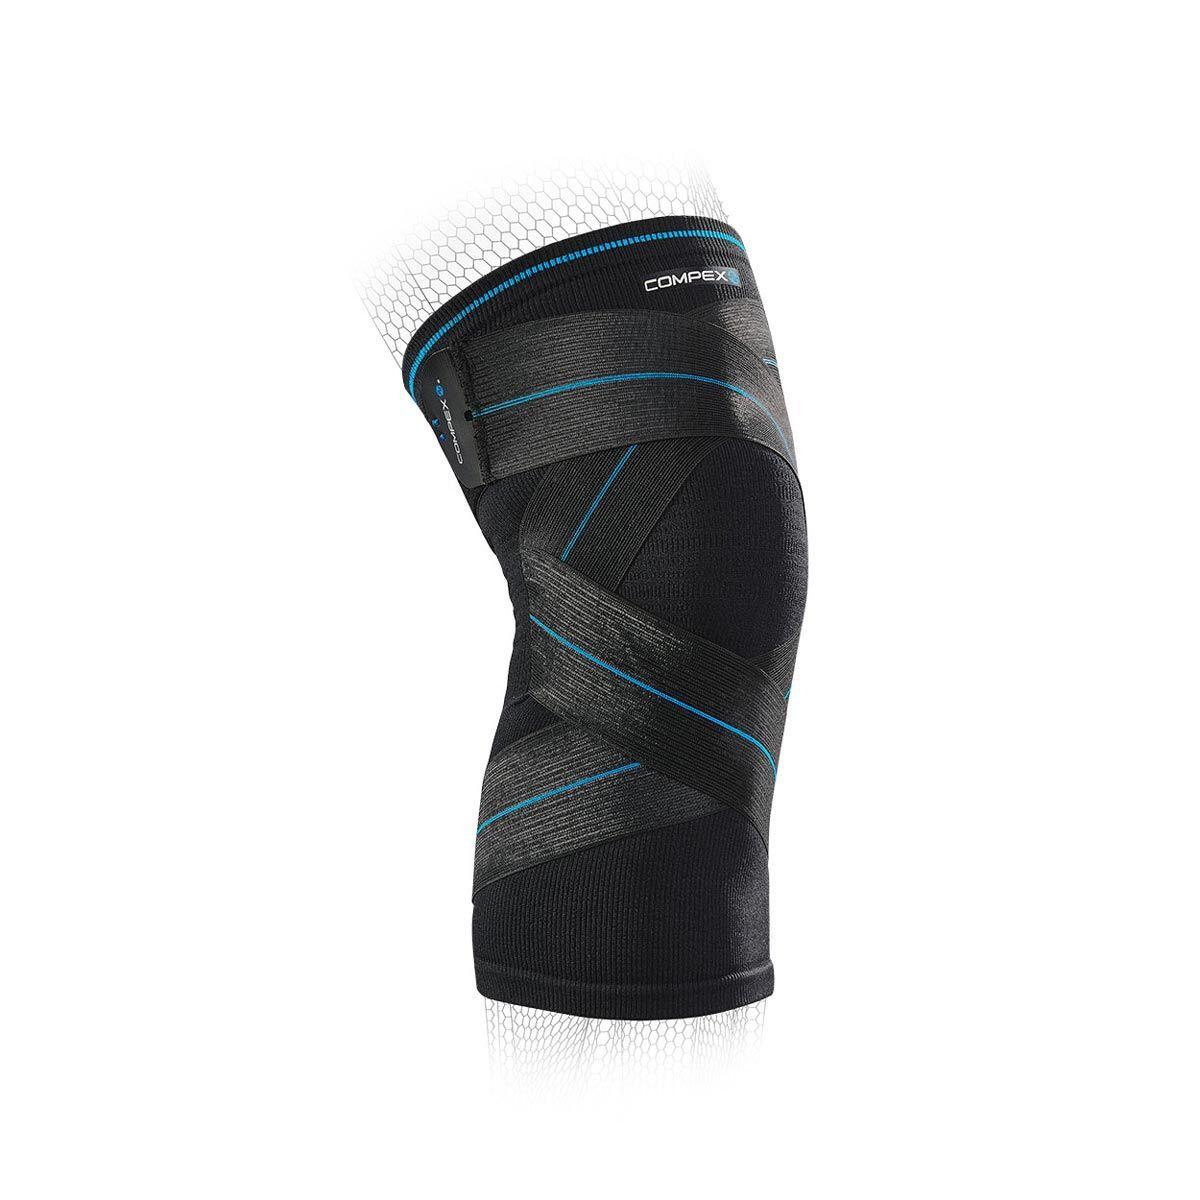 COMPEX COMPEX ACTIV’ KNEE+ compression support with cross-over straps